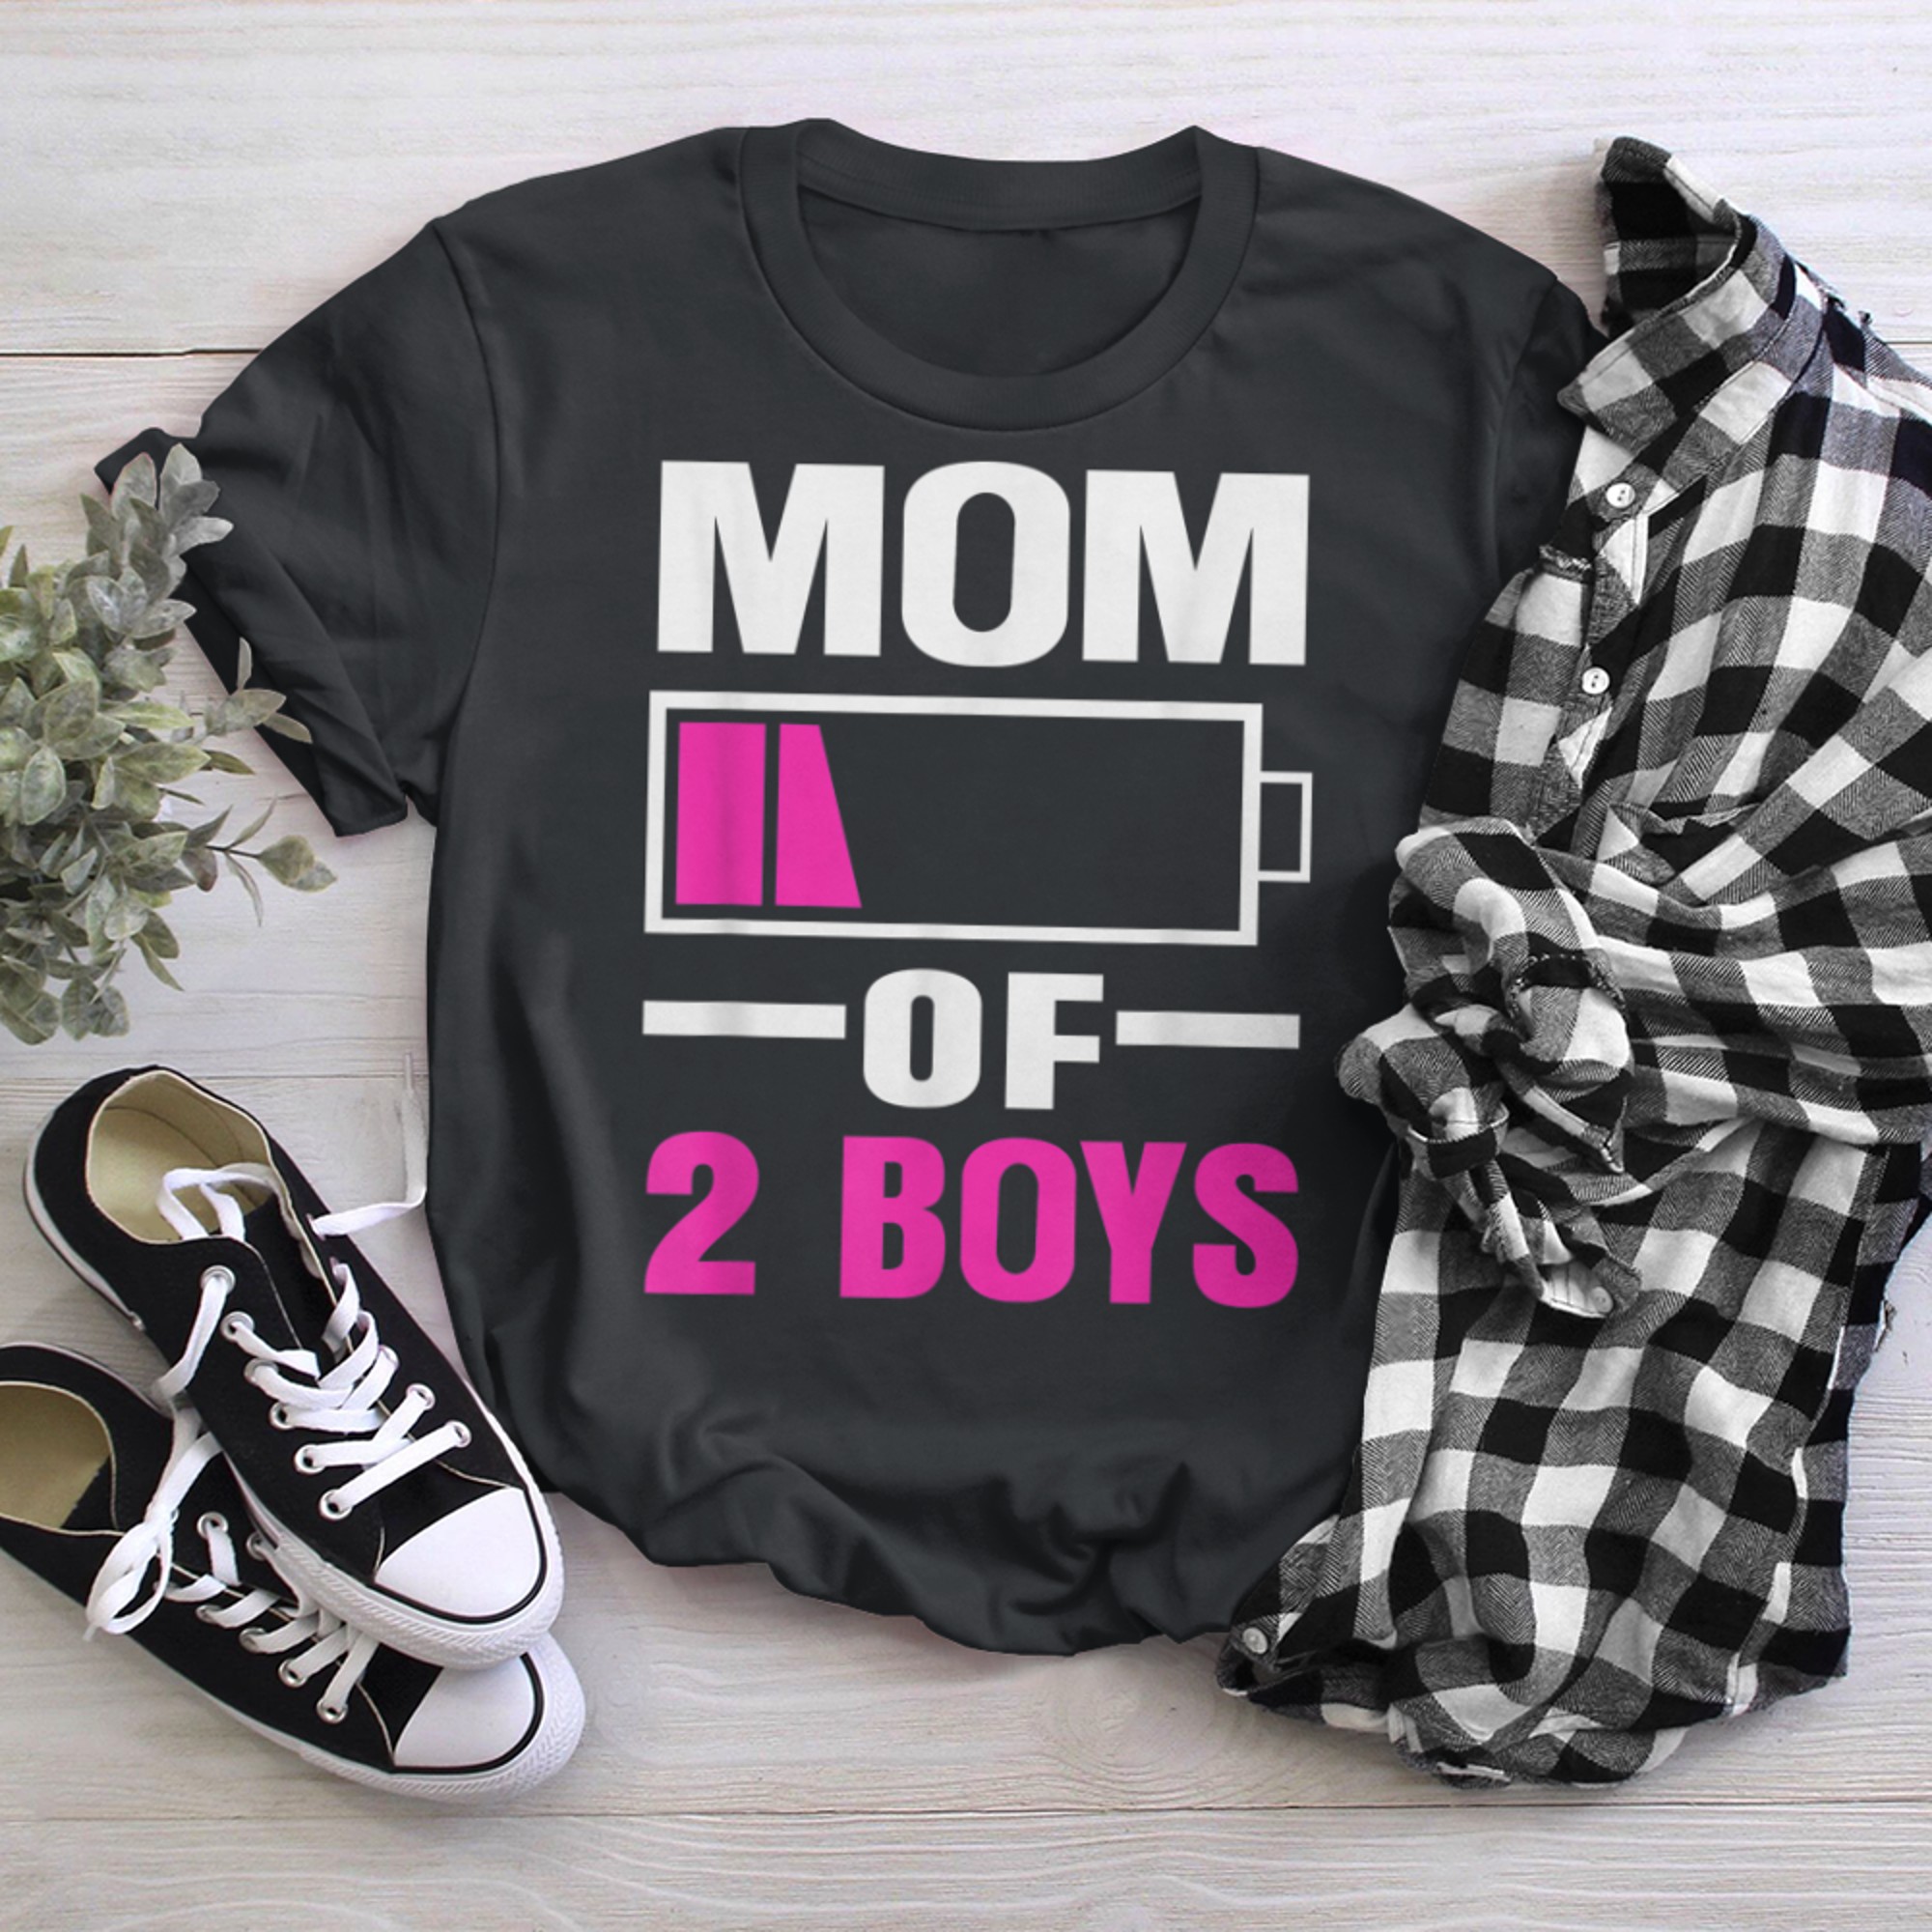 Mom of Low Battery Funny Mothers Day t-shirt black